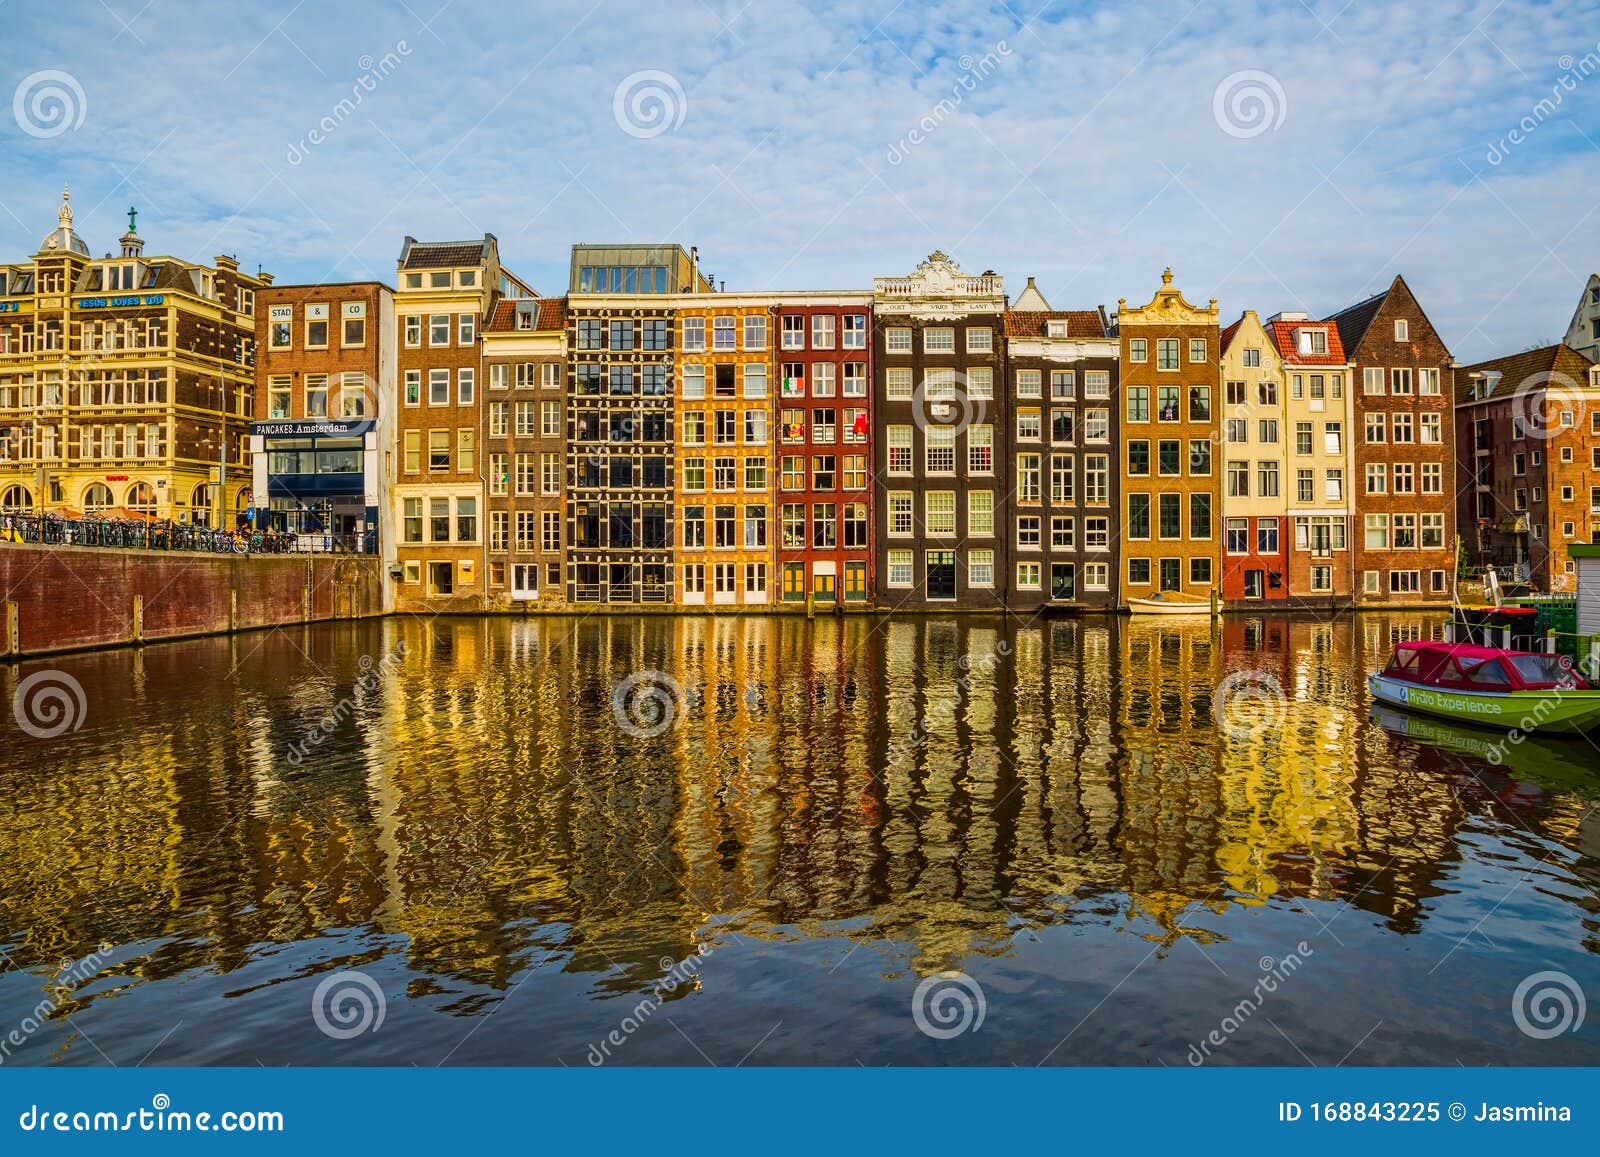 Amsterdam Old Houses Reflection in River Amstel Editorial Image - of amstel, life: 168843225